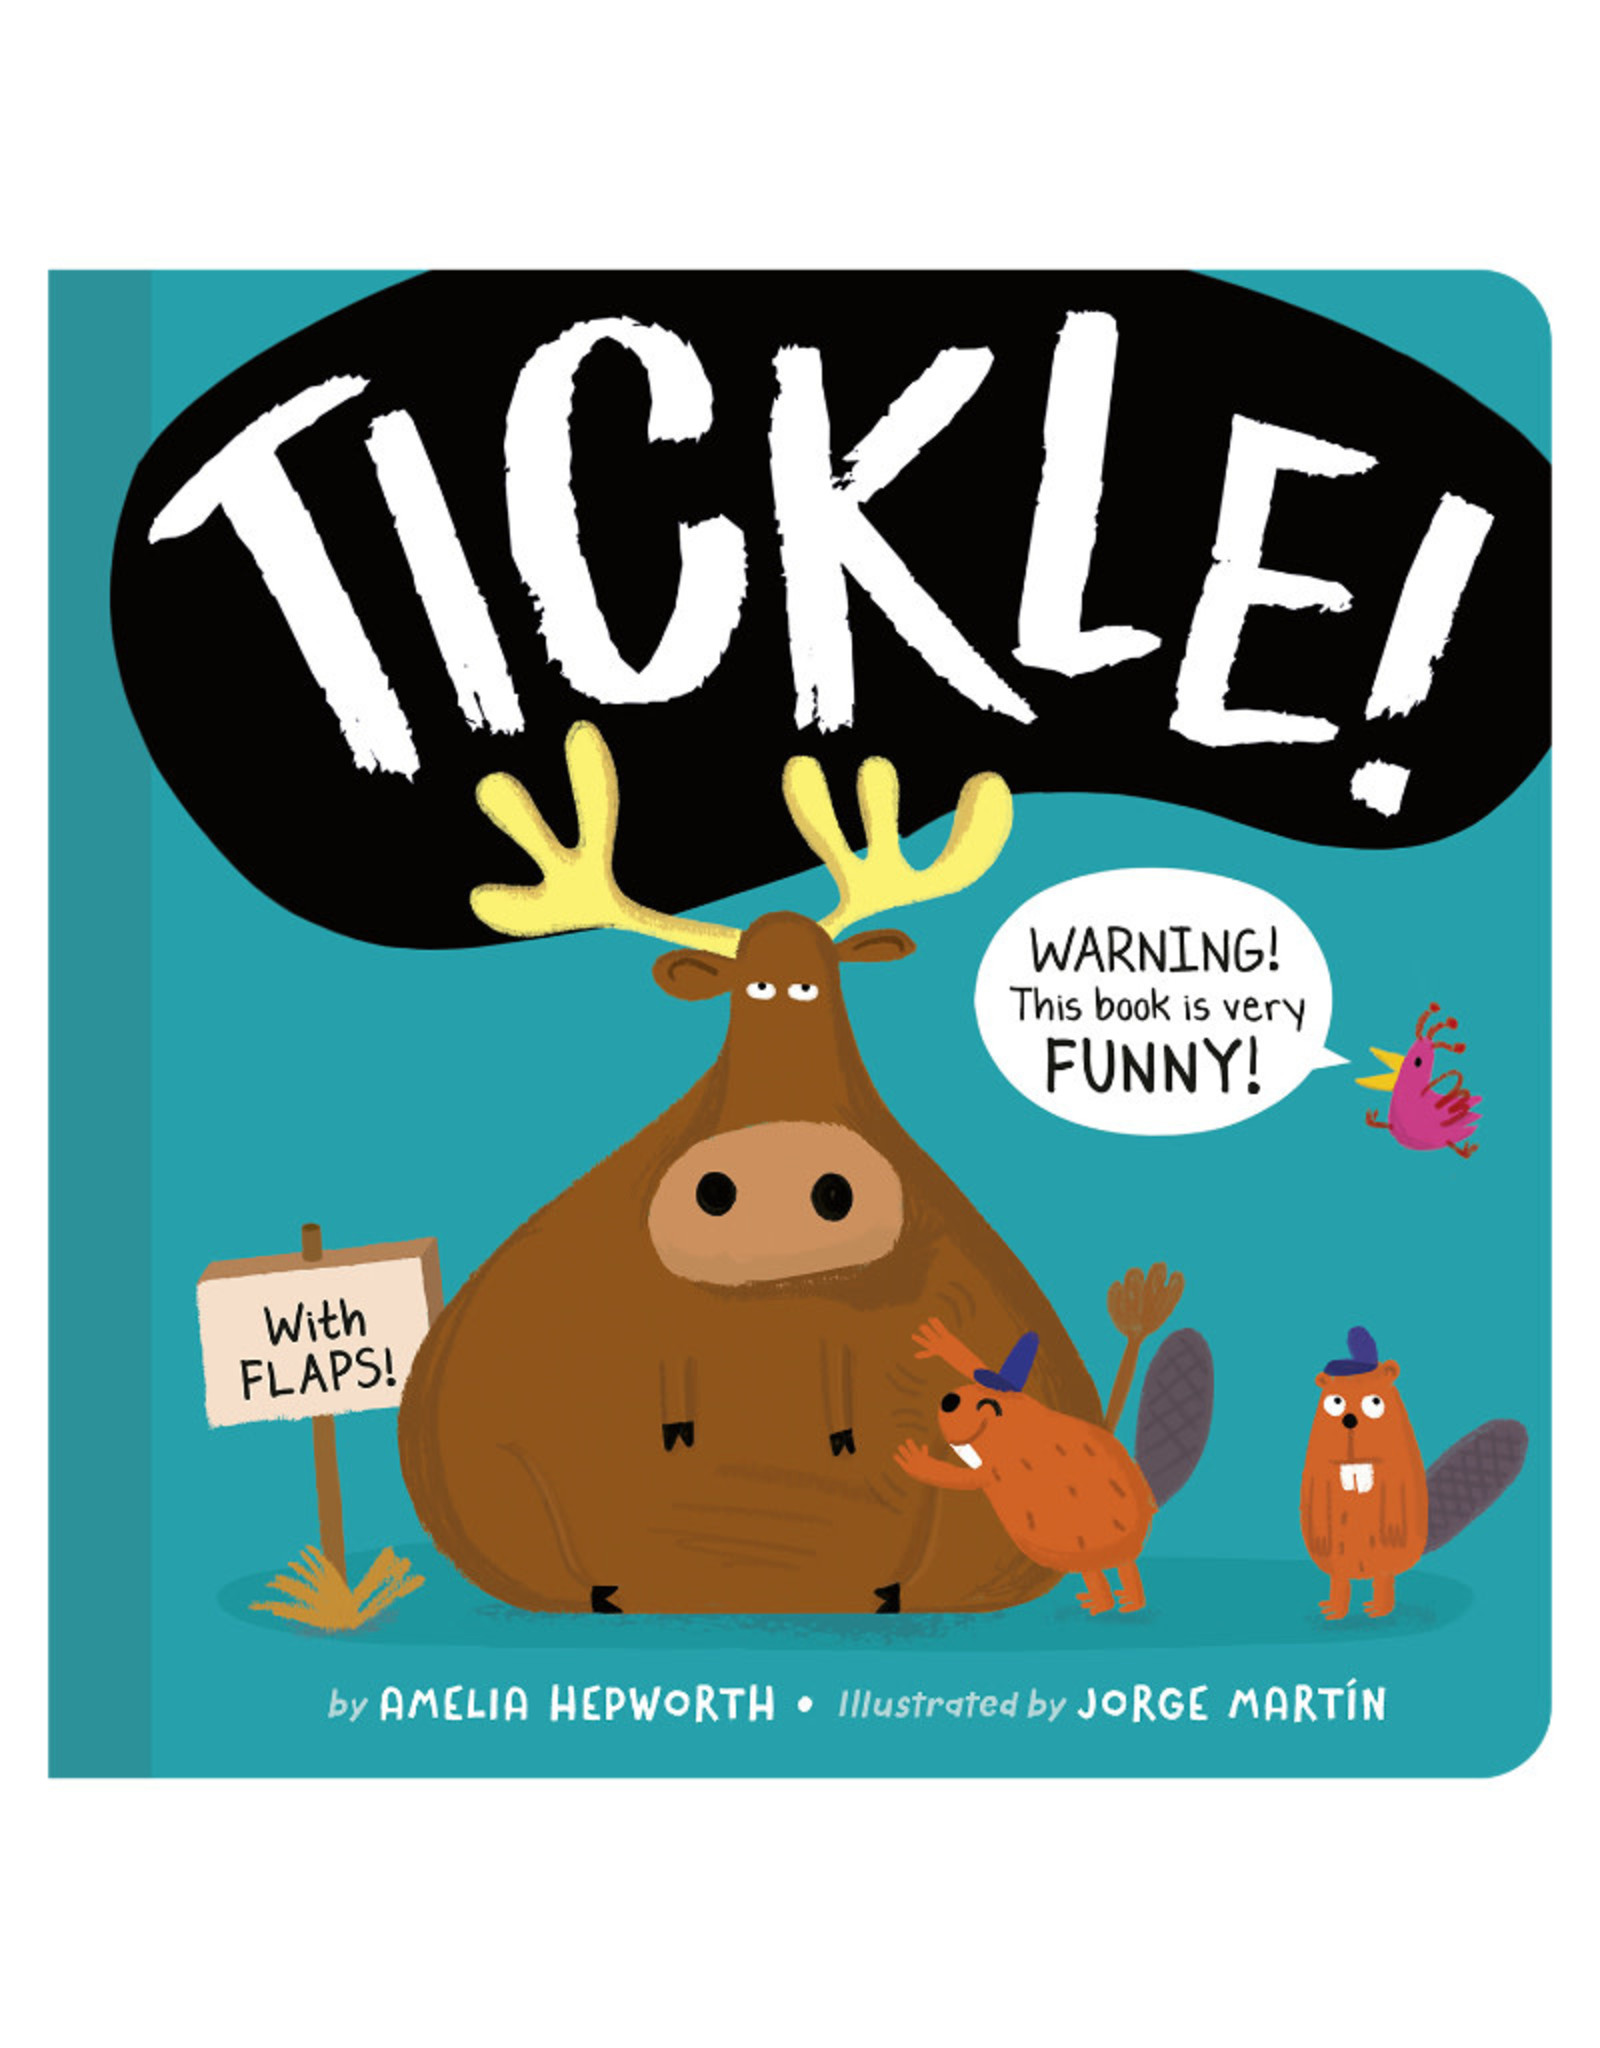 Tiger Tales TICKLE!  WARNING! This book is very FUNNY!